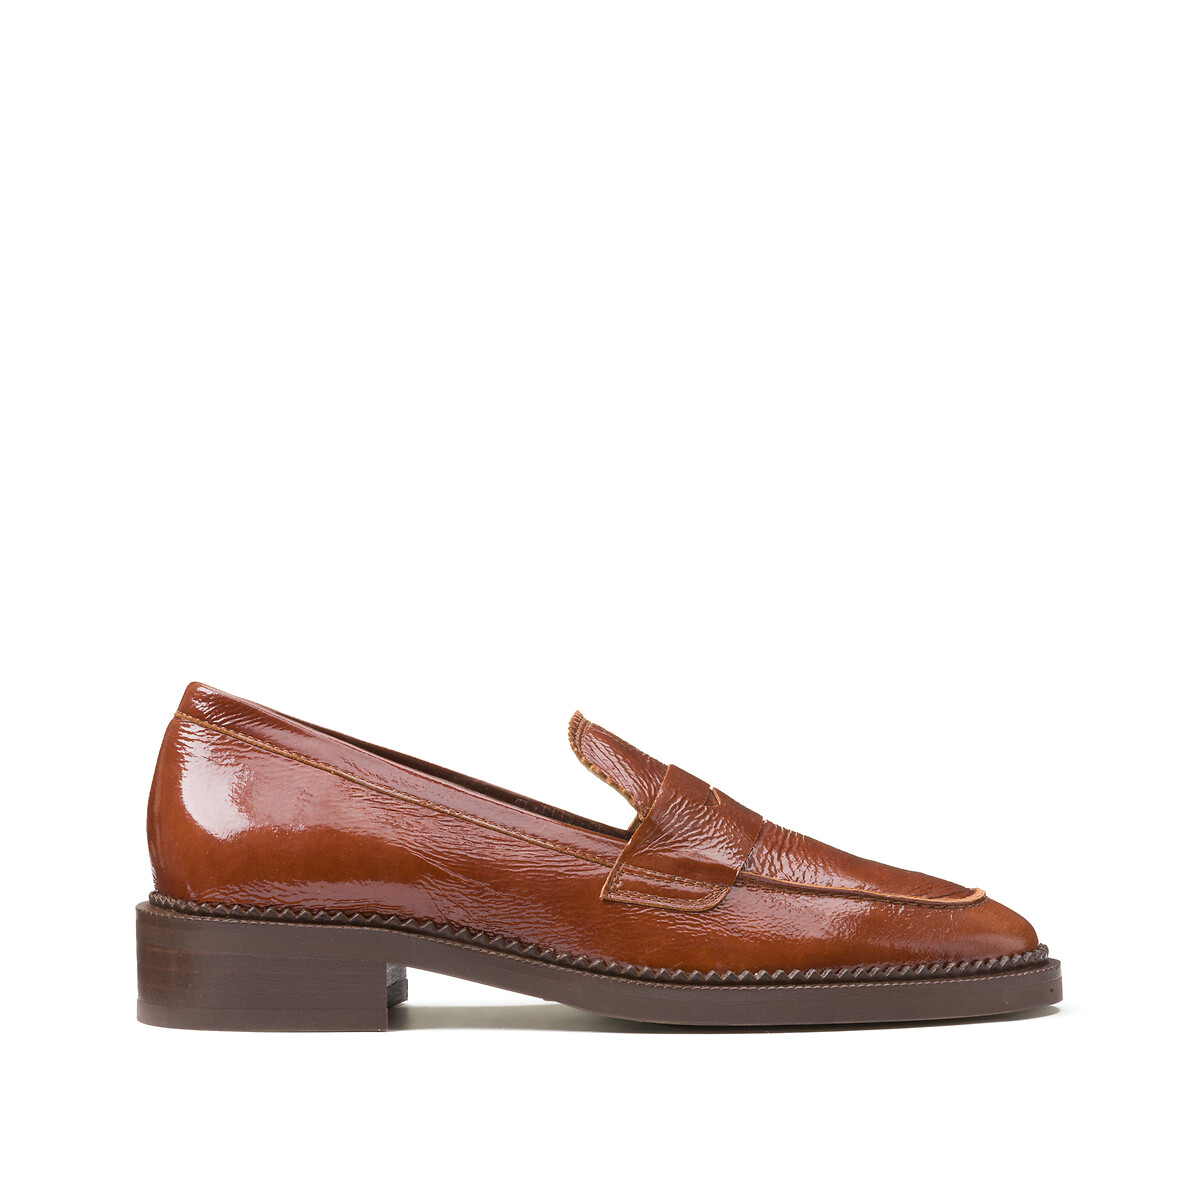 Ndeg 82 Leather Loafers